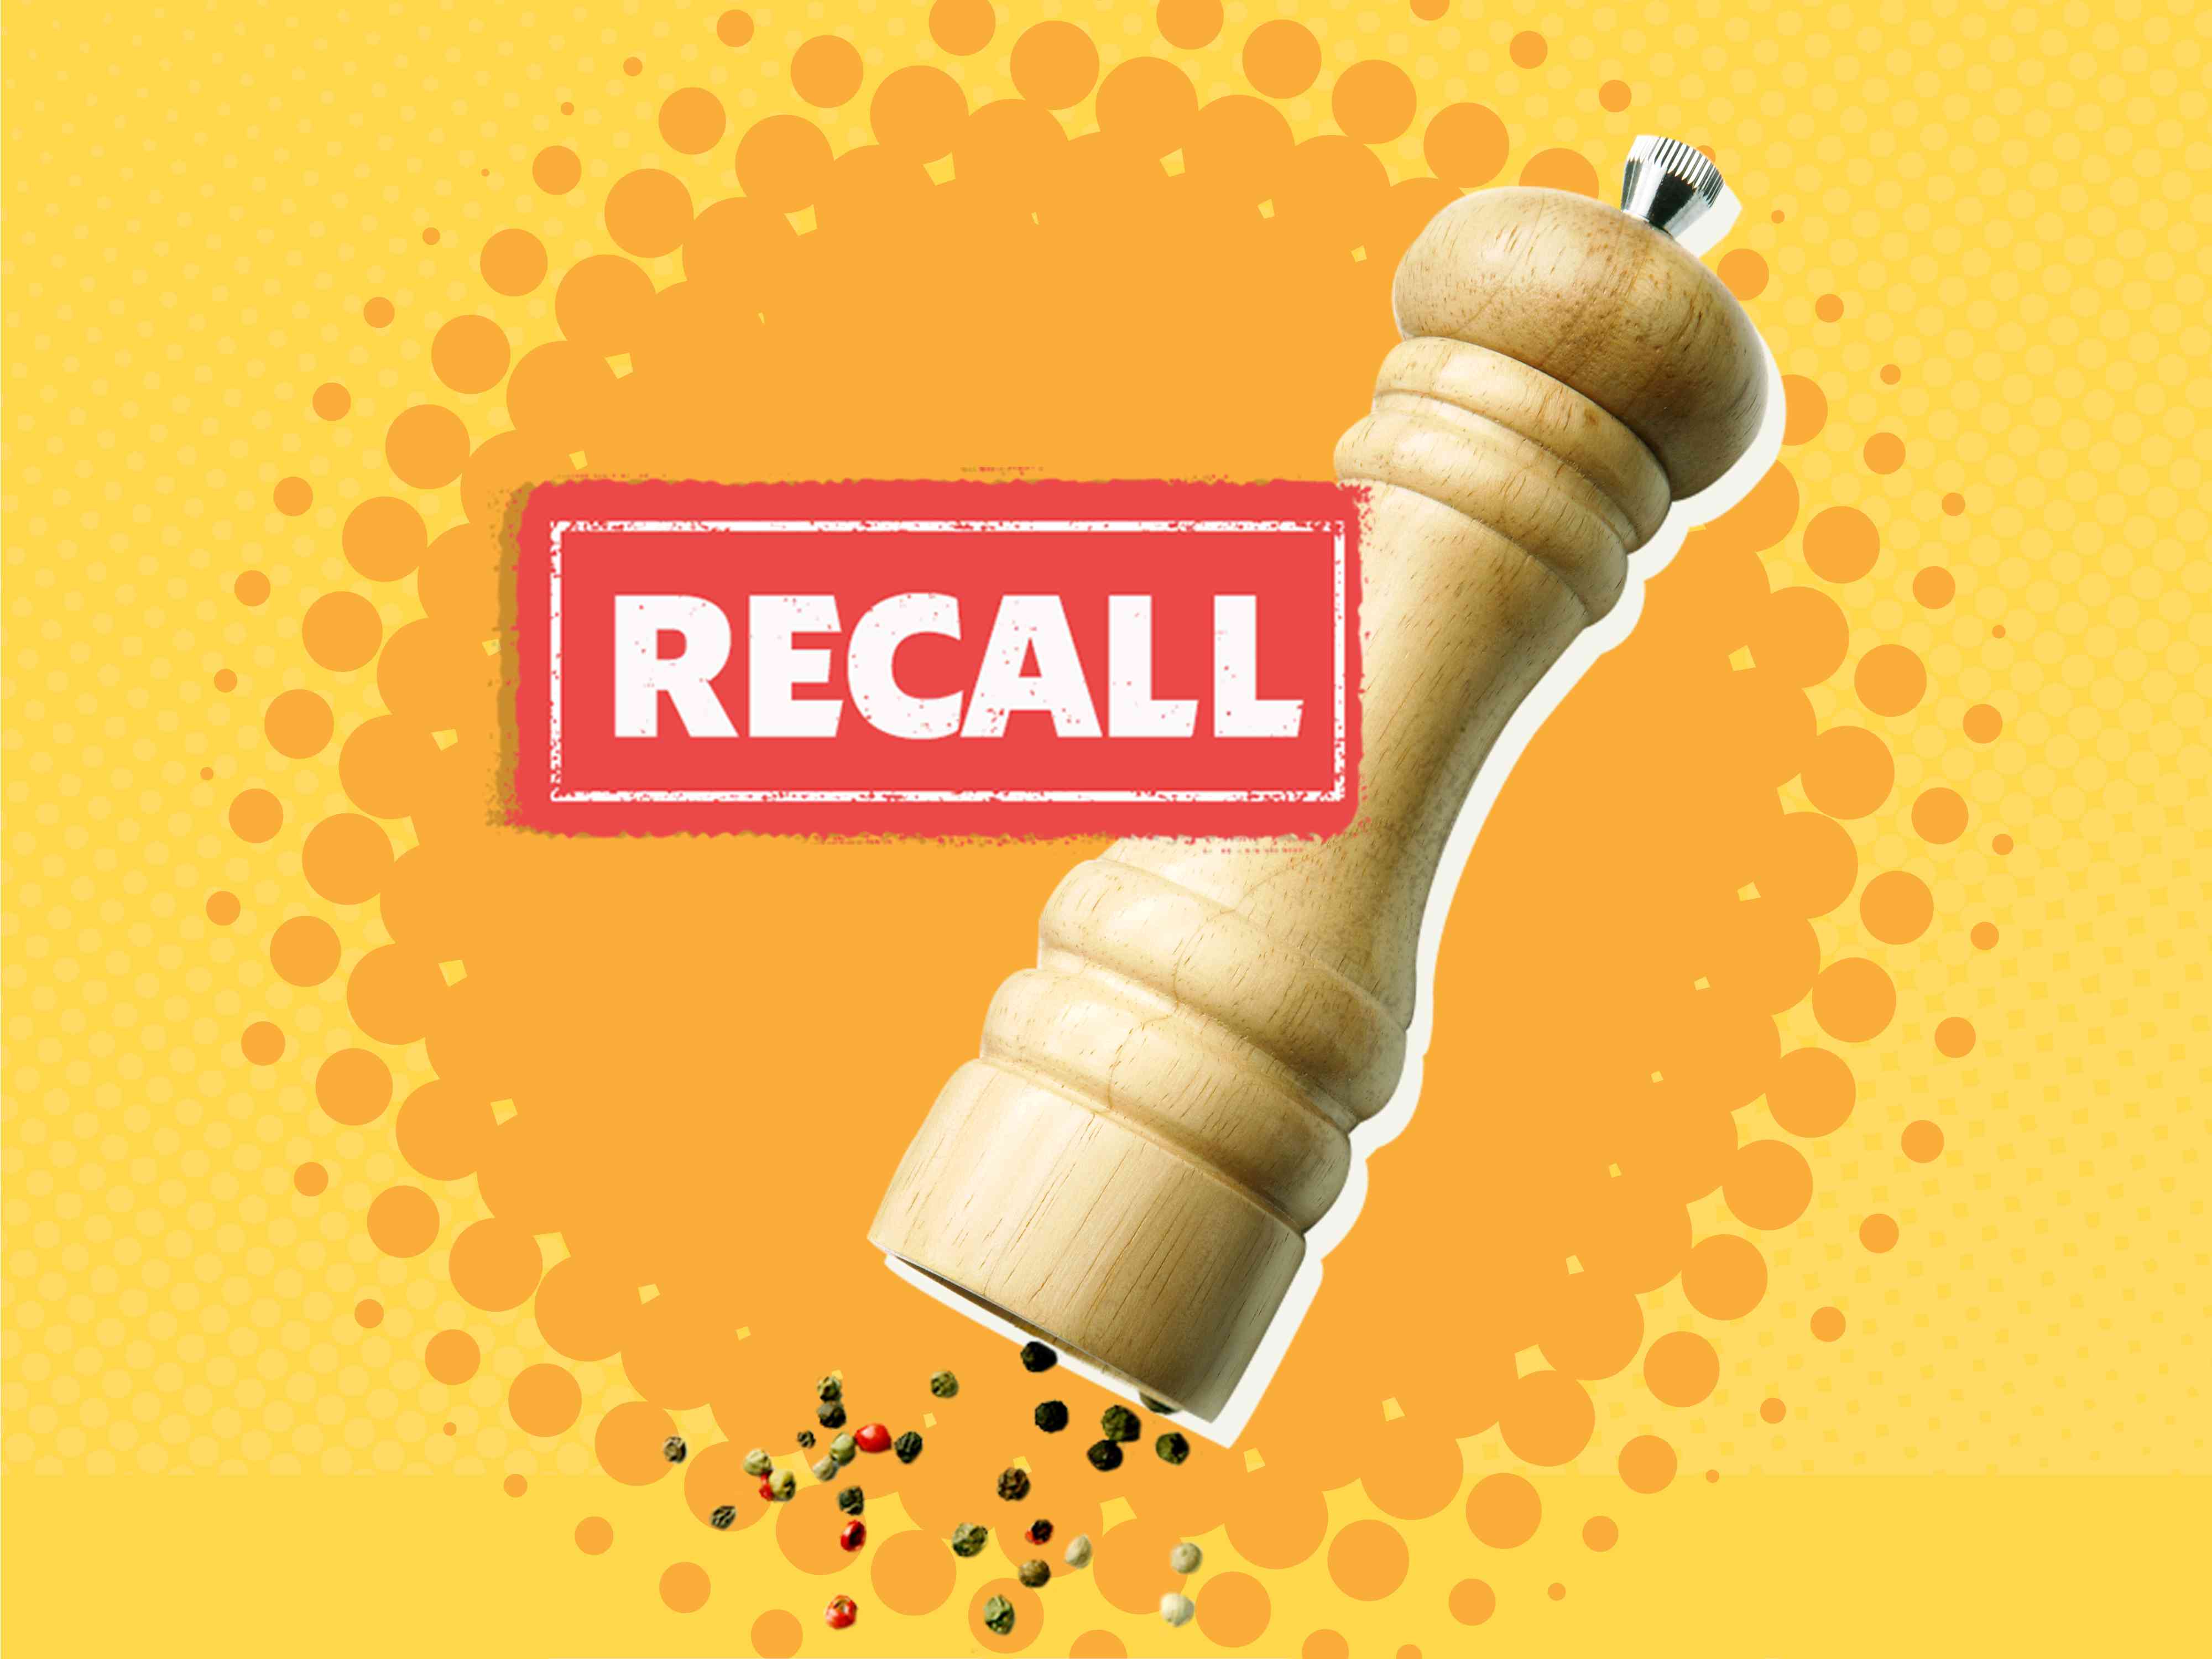 Black Pepper Distributed Nationwide Recalled for Possible Salmonella